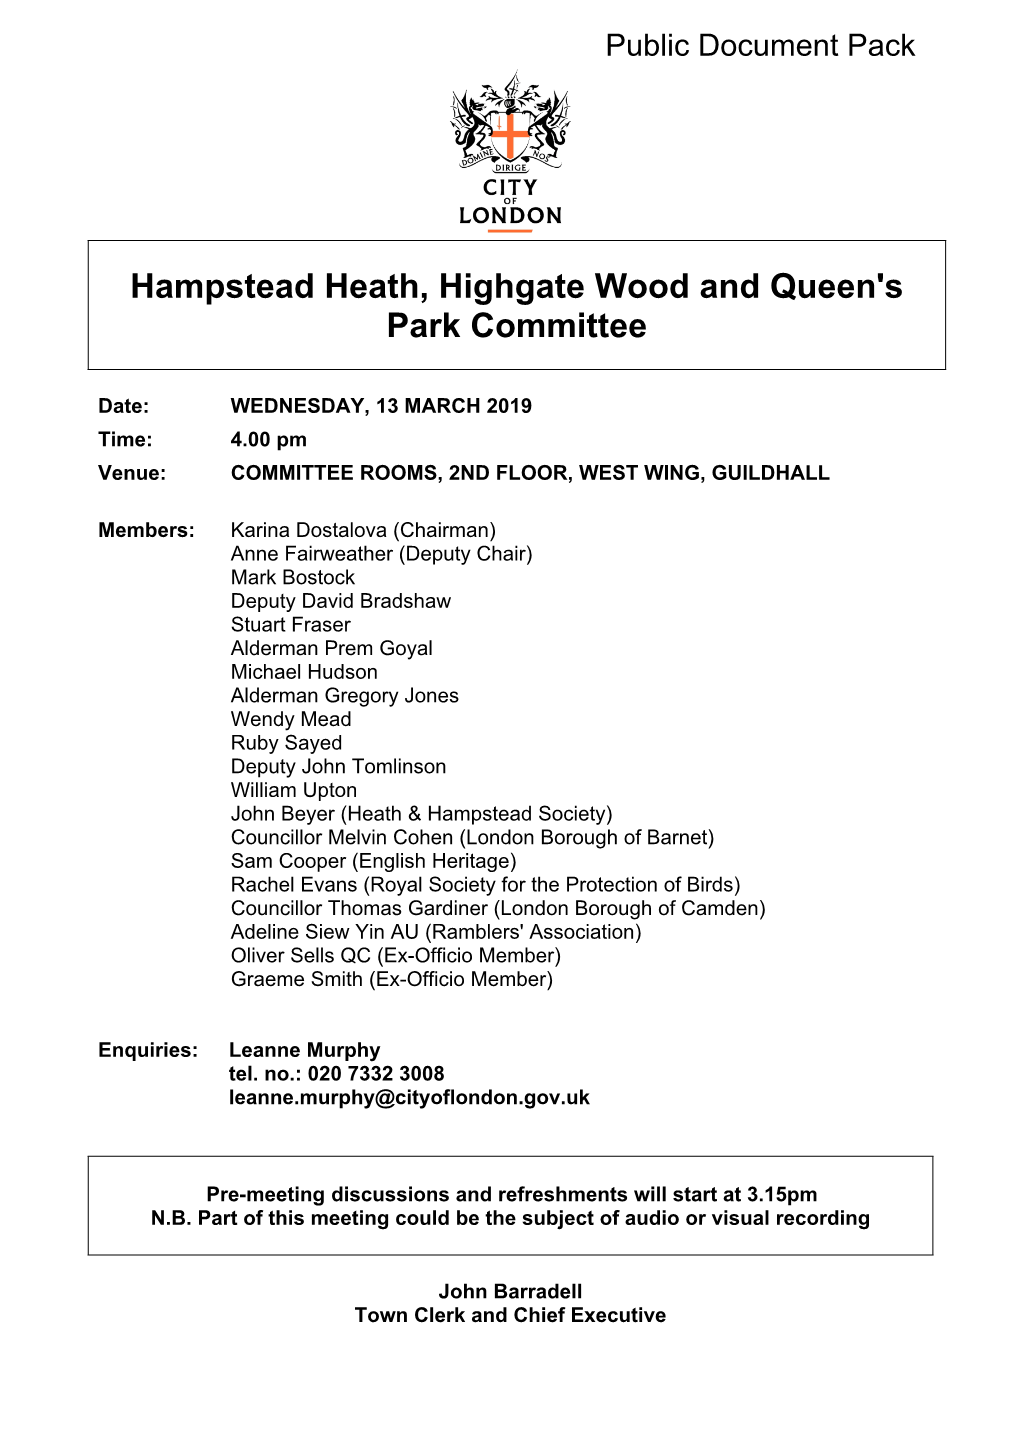 Hampstead Heath, Highgate Wood and Queen's Park Committee